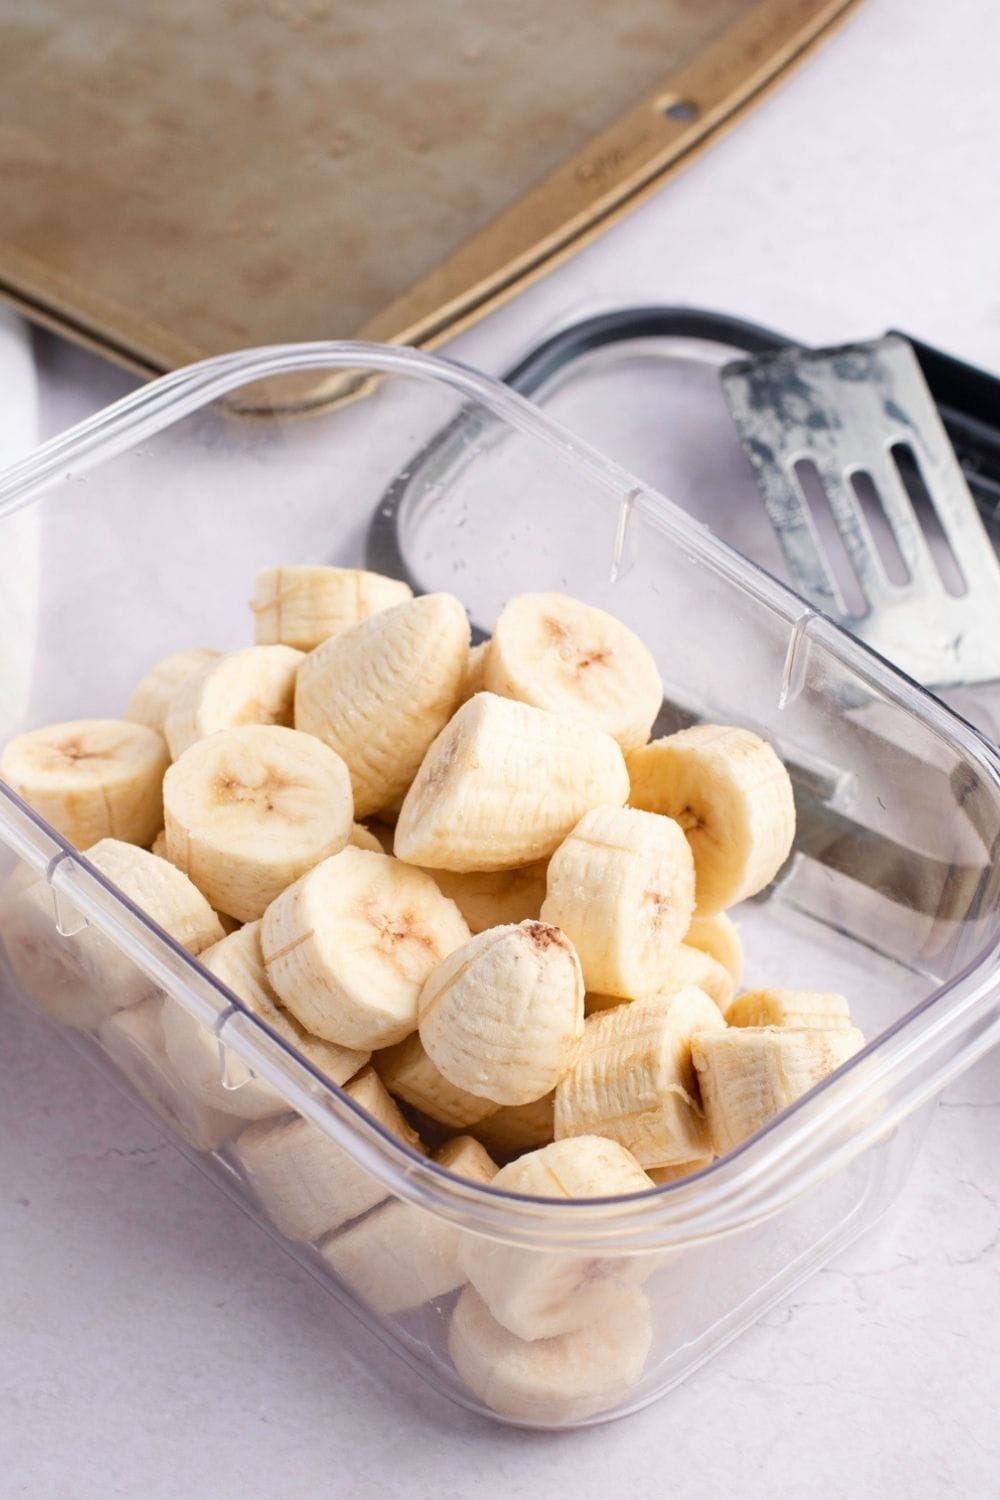 Fresh Banana Slices in a Glass Bowl